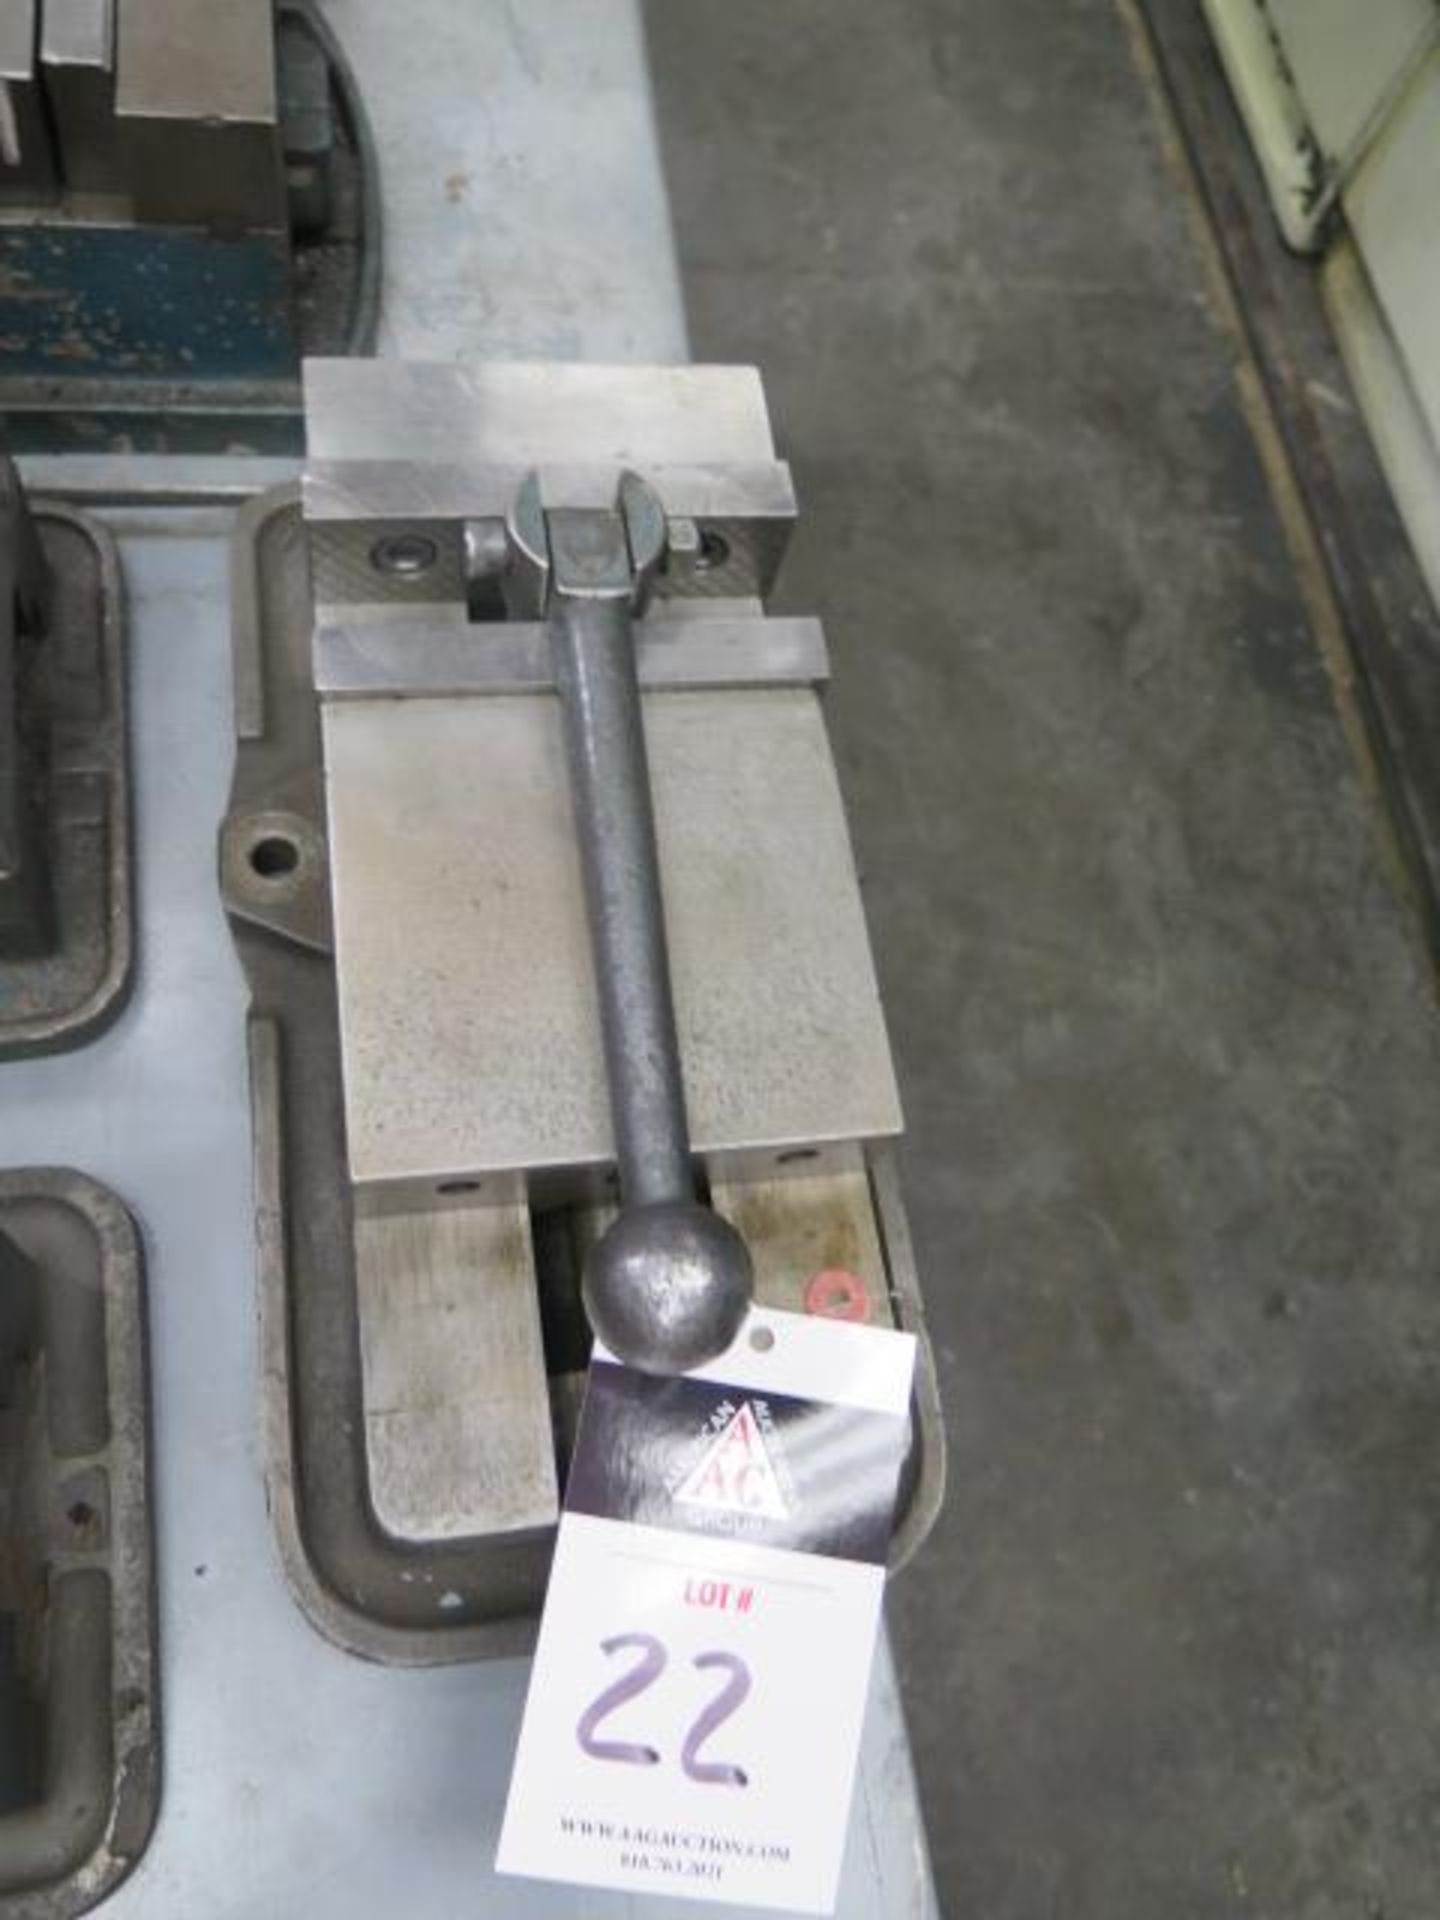 5" Angle-Lock Vise (SOLD AS-IS - NO WARRANTY)